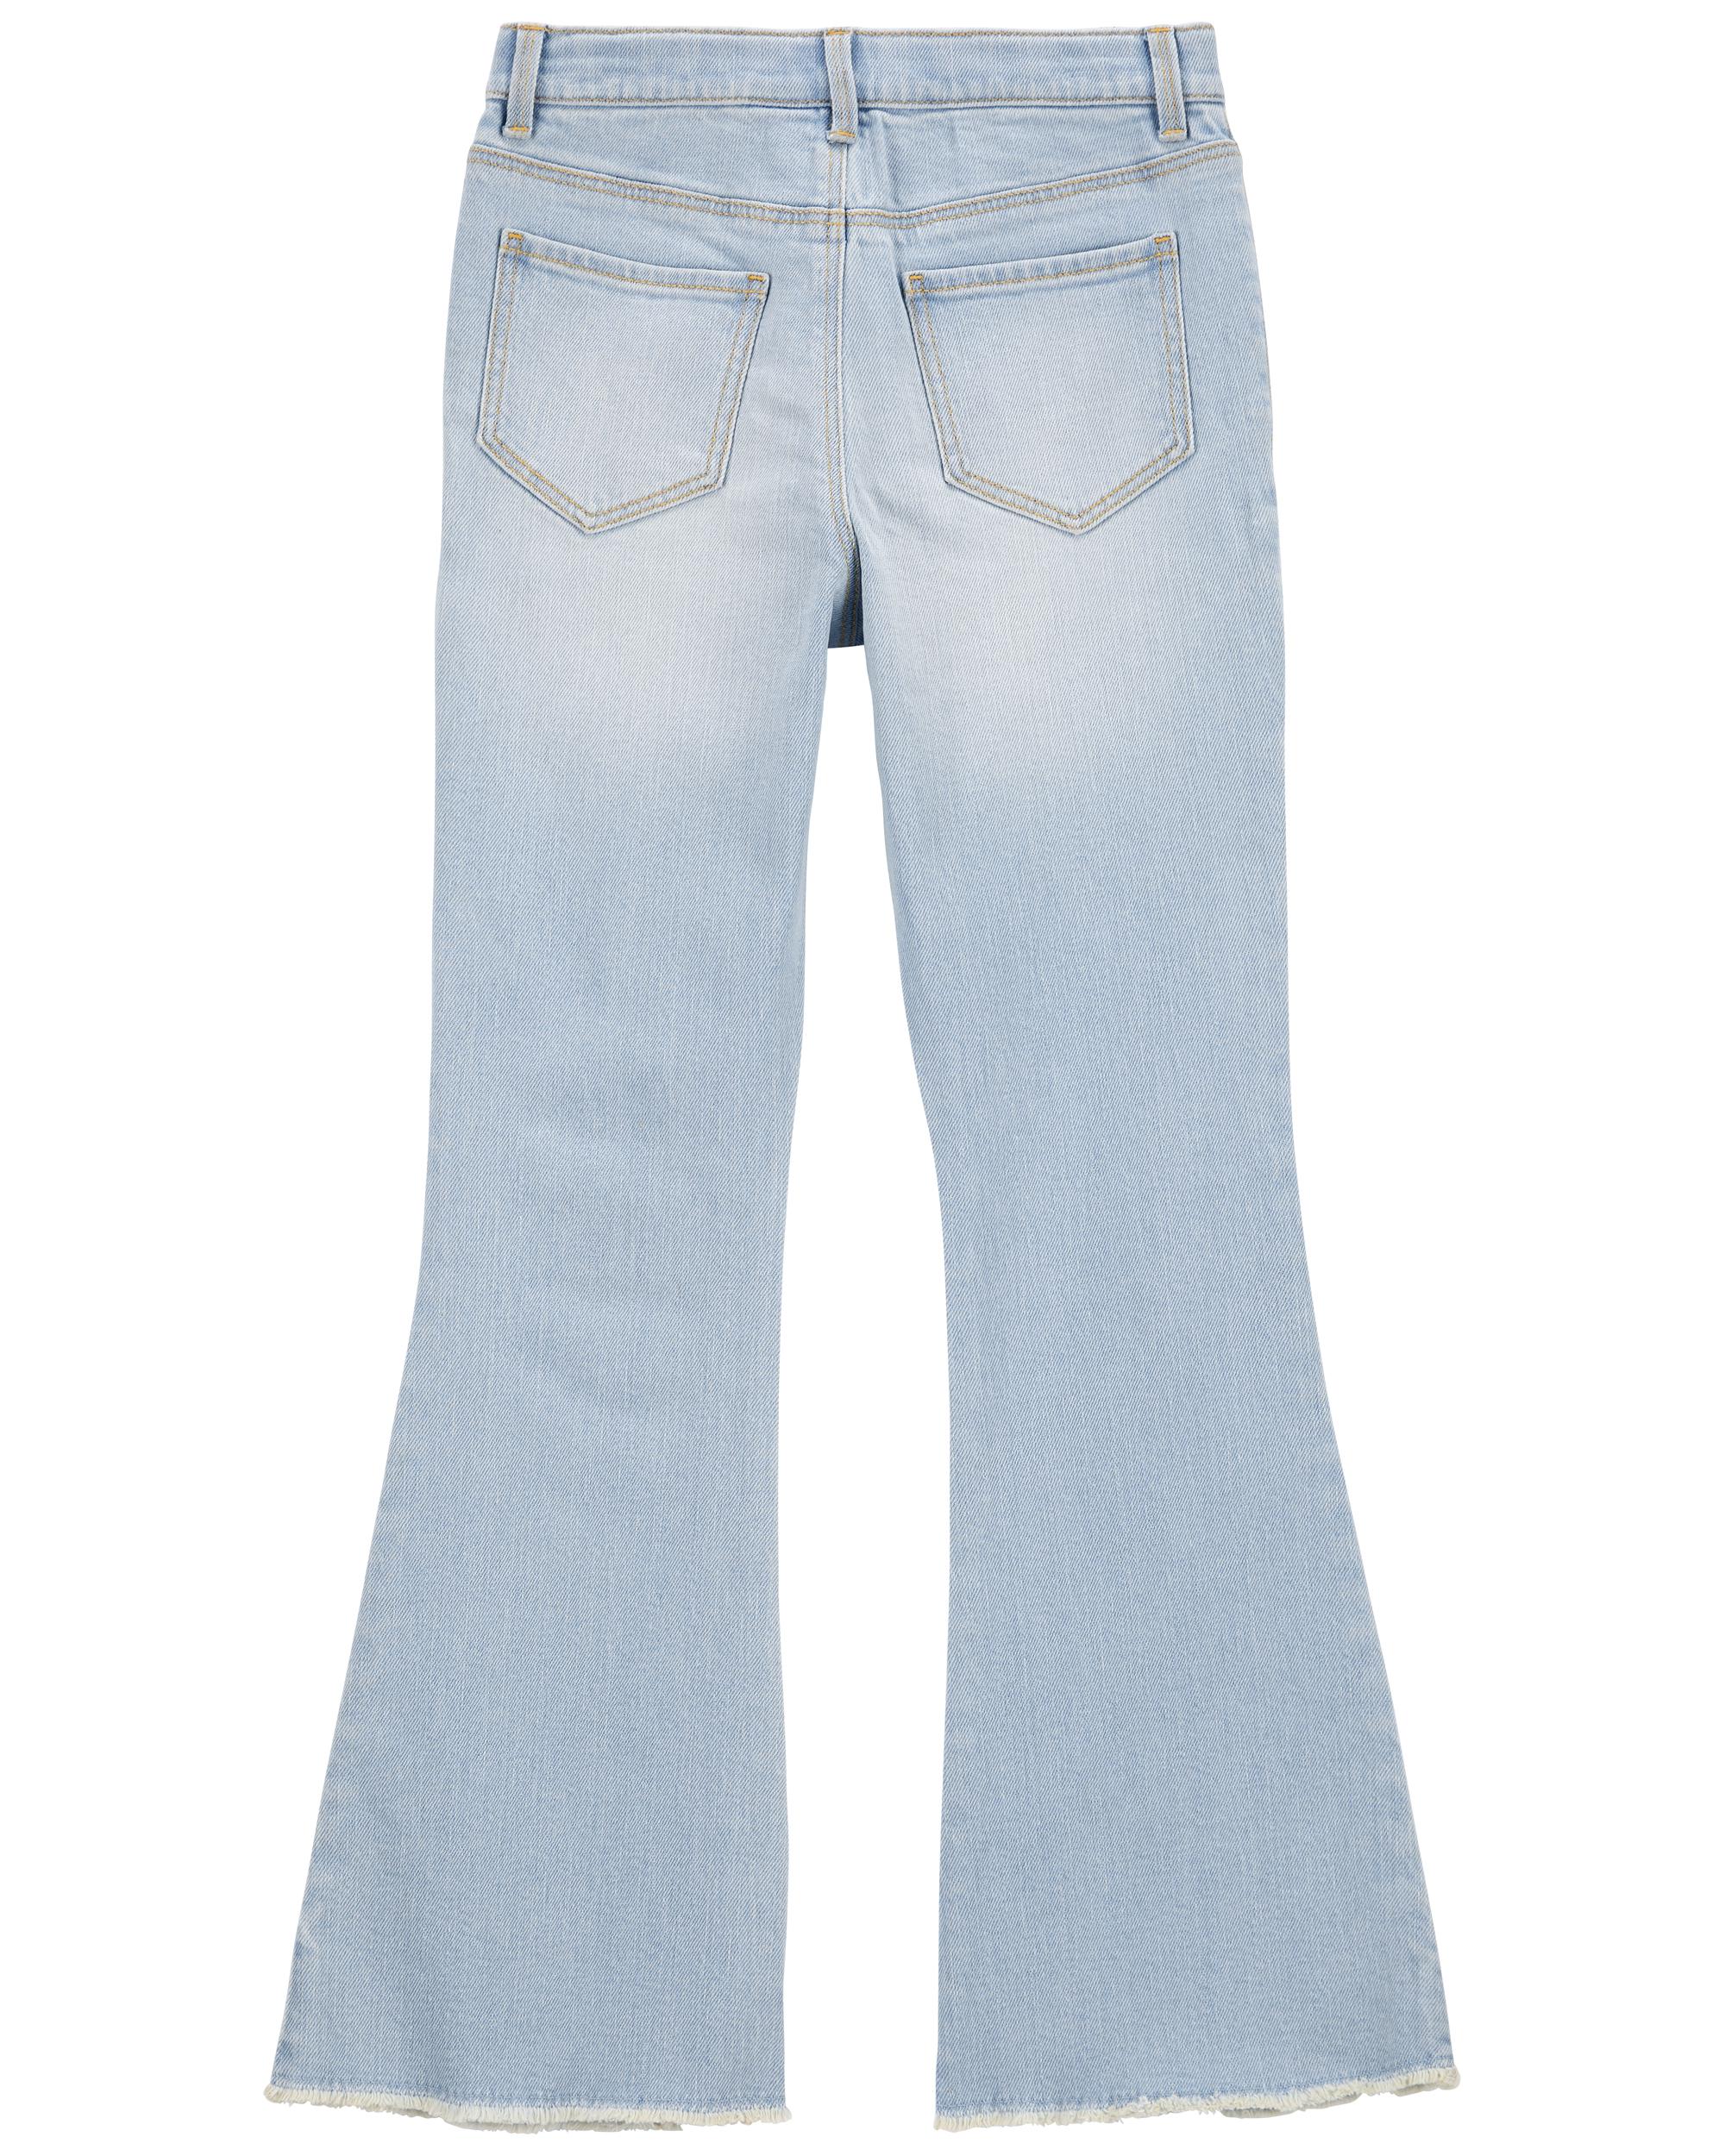 Okalpis - Low-Rise Washed Bell-Bottom Jeans